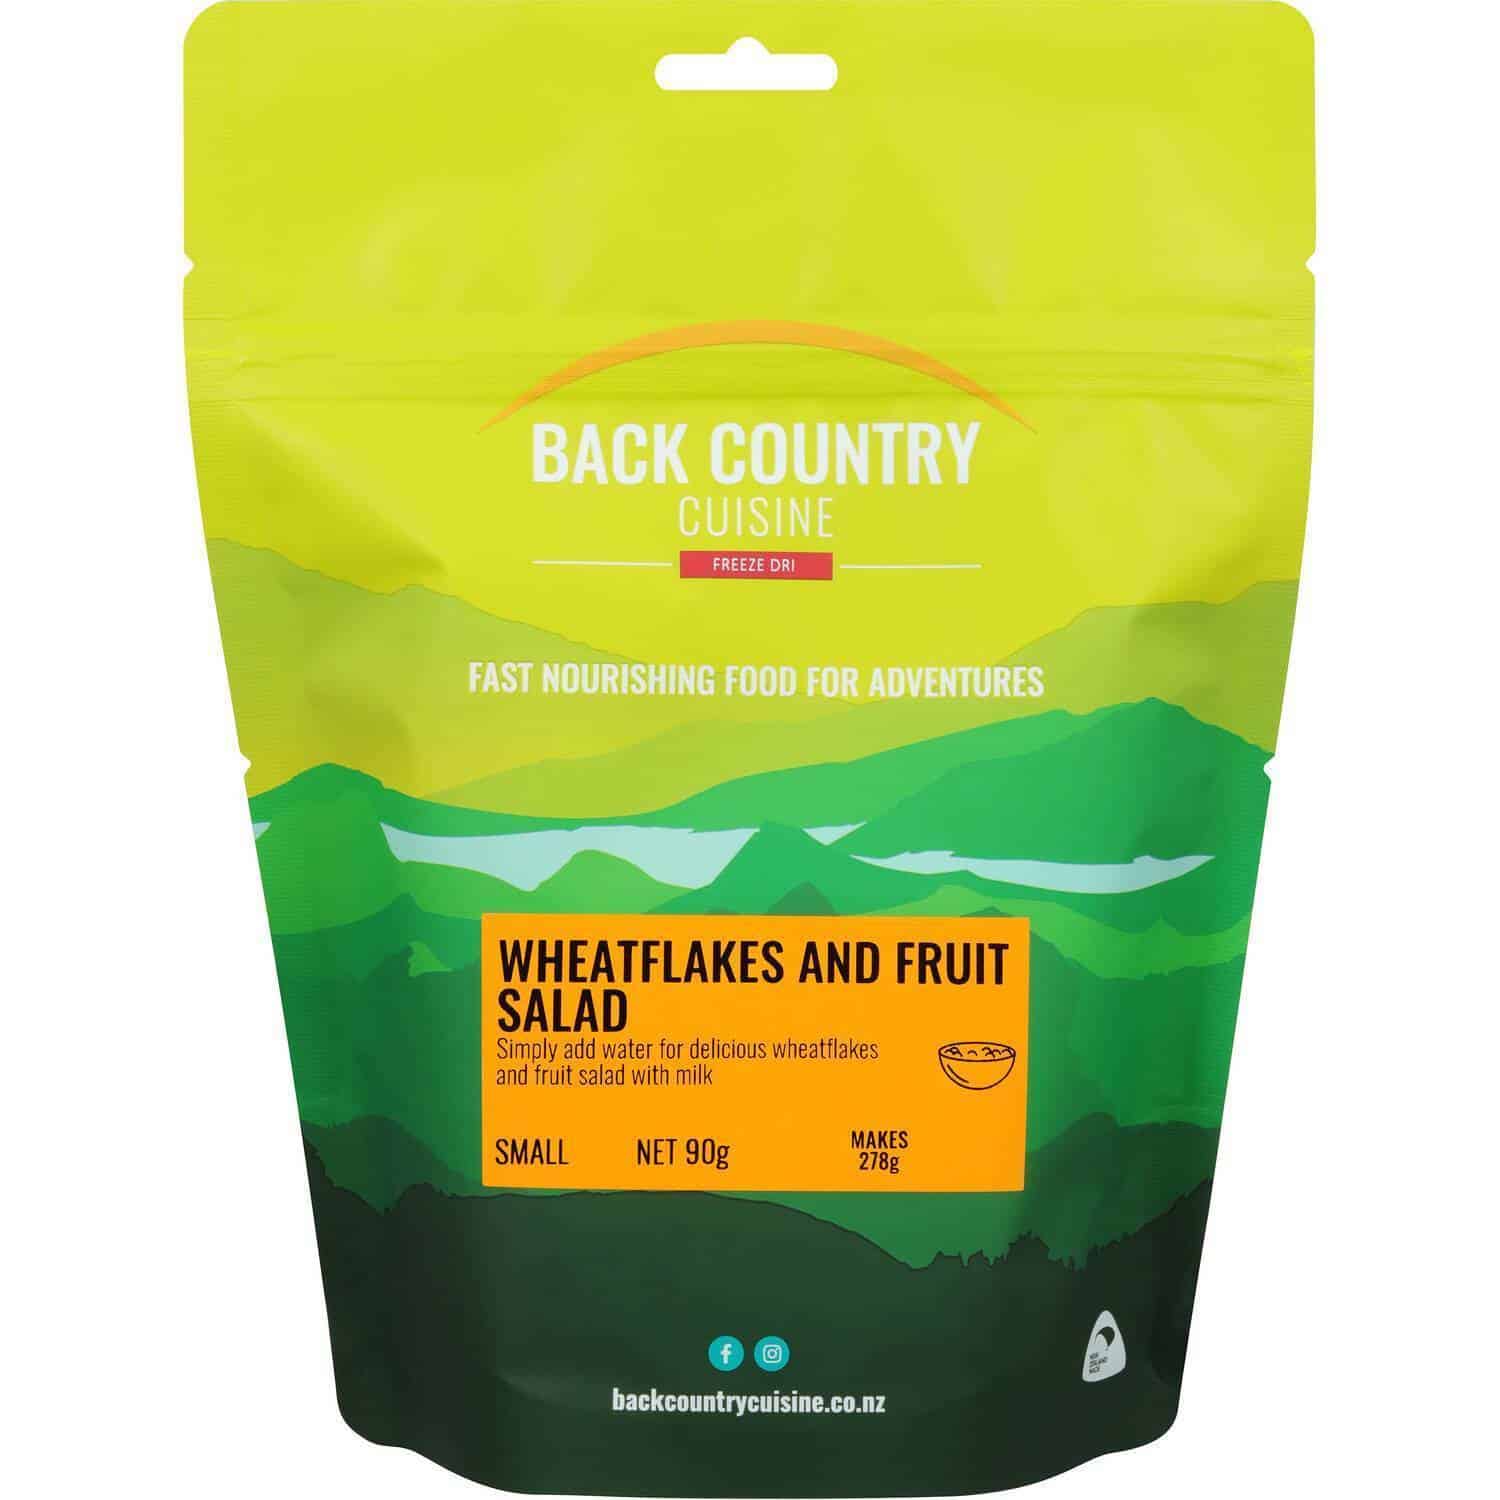 Back Country Cuisine Wheatflakes & Fruit Salad Small - Tramping Food and Accessories sold by Venture Outdoors NZ